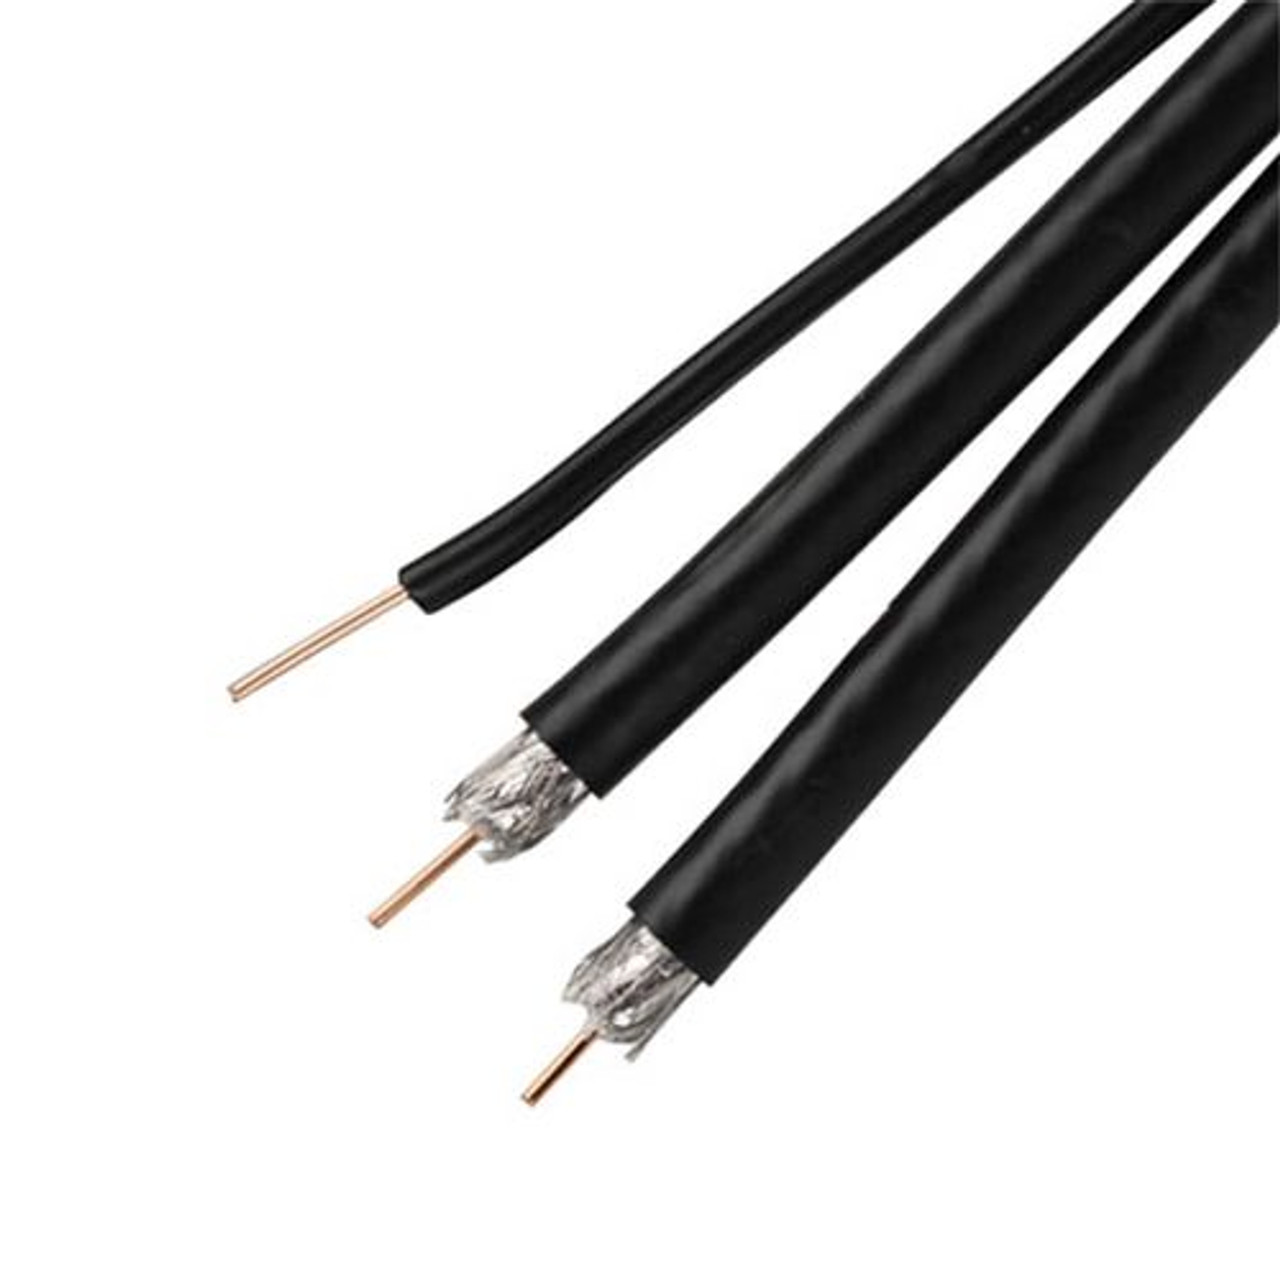 Steren 200-940BK 100' FT RG6 Coaxial Cable Dual with Ground Wire Black UL CM Digital HDTV CATV Satellite 3 GHz 18 AWG CCS Center 60% Braid Dual RG-6 Copper Clad with Ground, Bulk Cable Roll, Part # 200940-BK